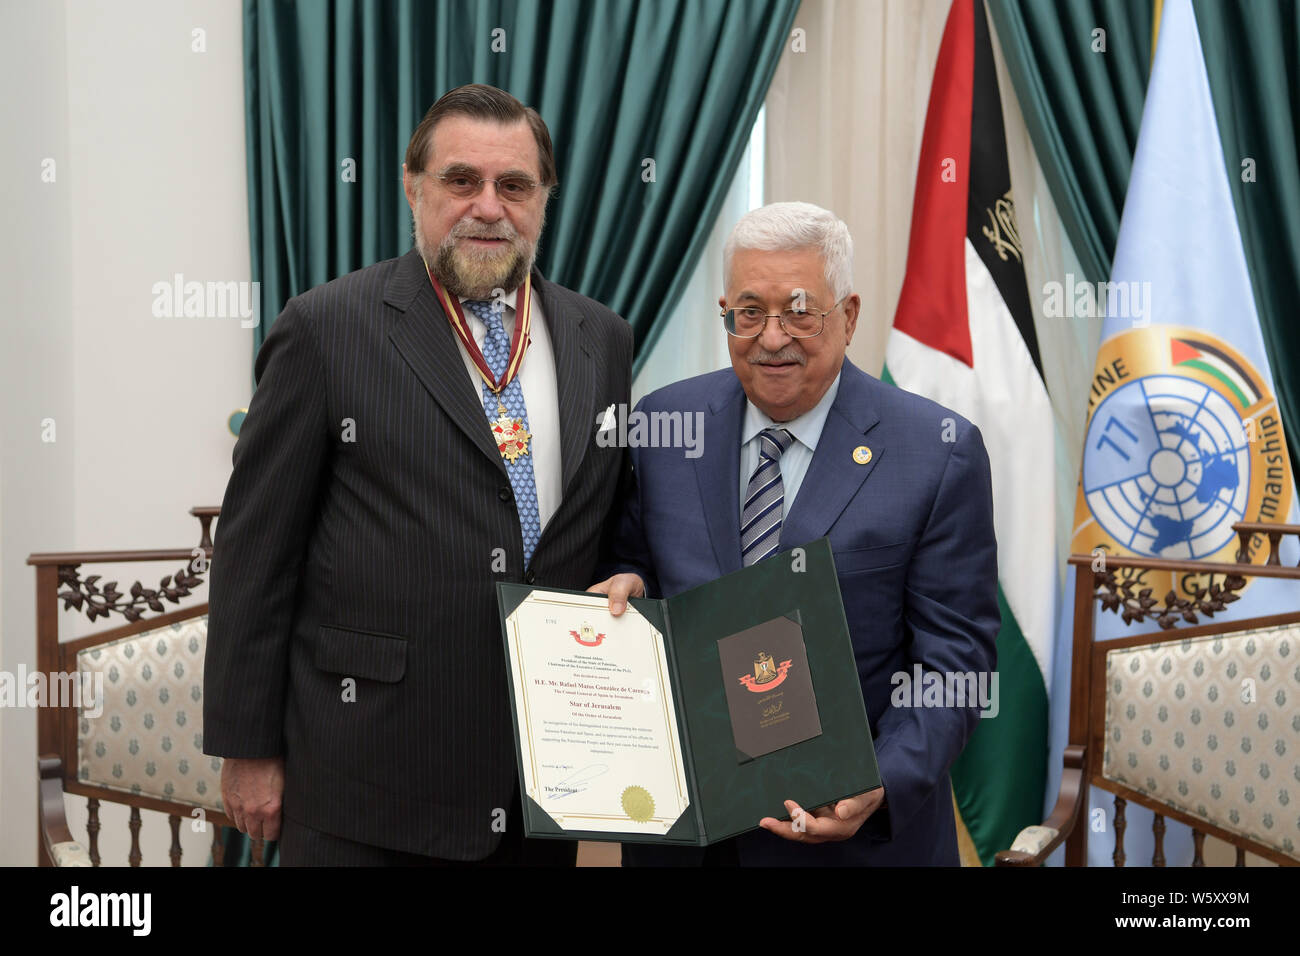 Ramallah, West Bank, Palestinian Territory. 30th July 2019. Palestinian President Mahmoud Abbas meets with Consul General of Spain in Jerusalem Rafael Matos GonzÃlez de Careaga, in the West Bank city of Ramallah, Jly 30, 2019 Credit: Thaer Ganaim/APA Images/ZUMA Wire/Alamy Live News Stock Photo